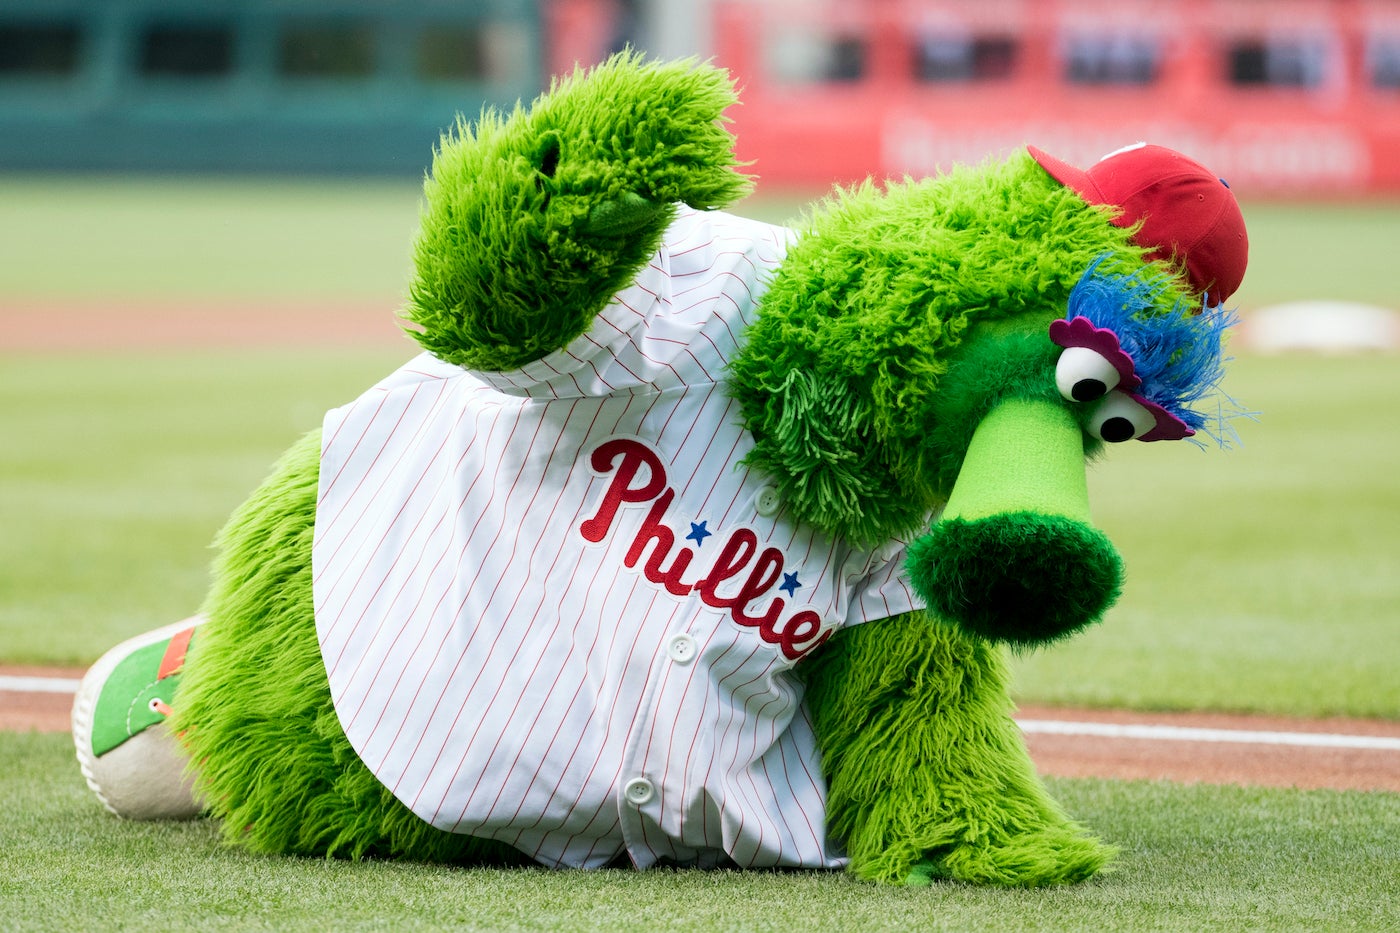 Phanatic is back! Original Phils mascot can stay in Philly - WHYY